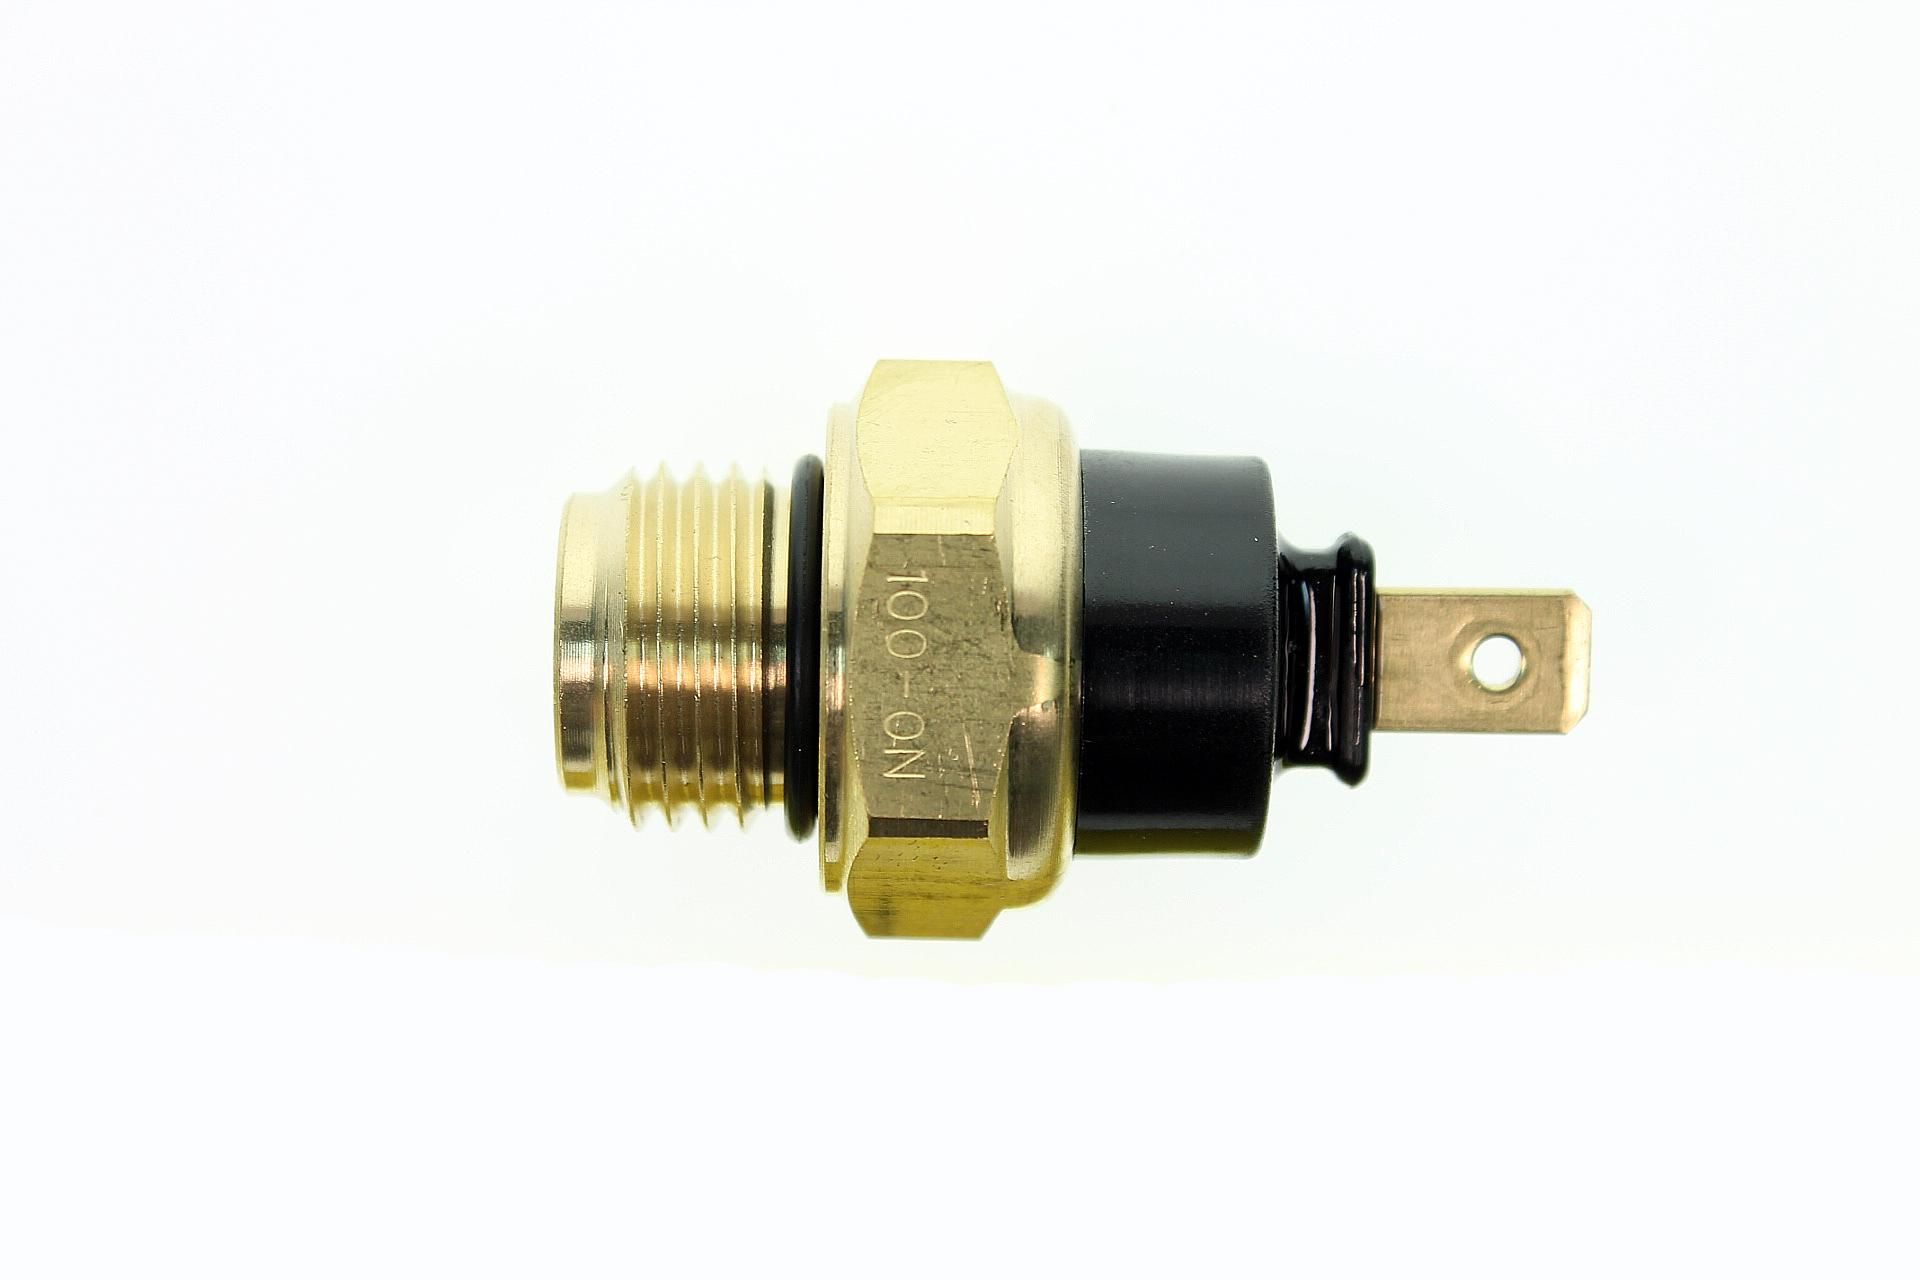 37760-MR1-003 THERMOSTAT SWITCH